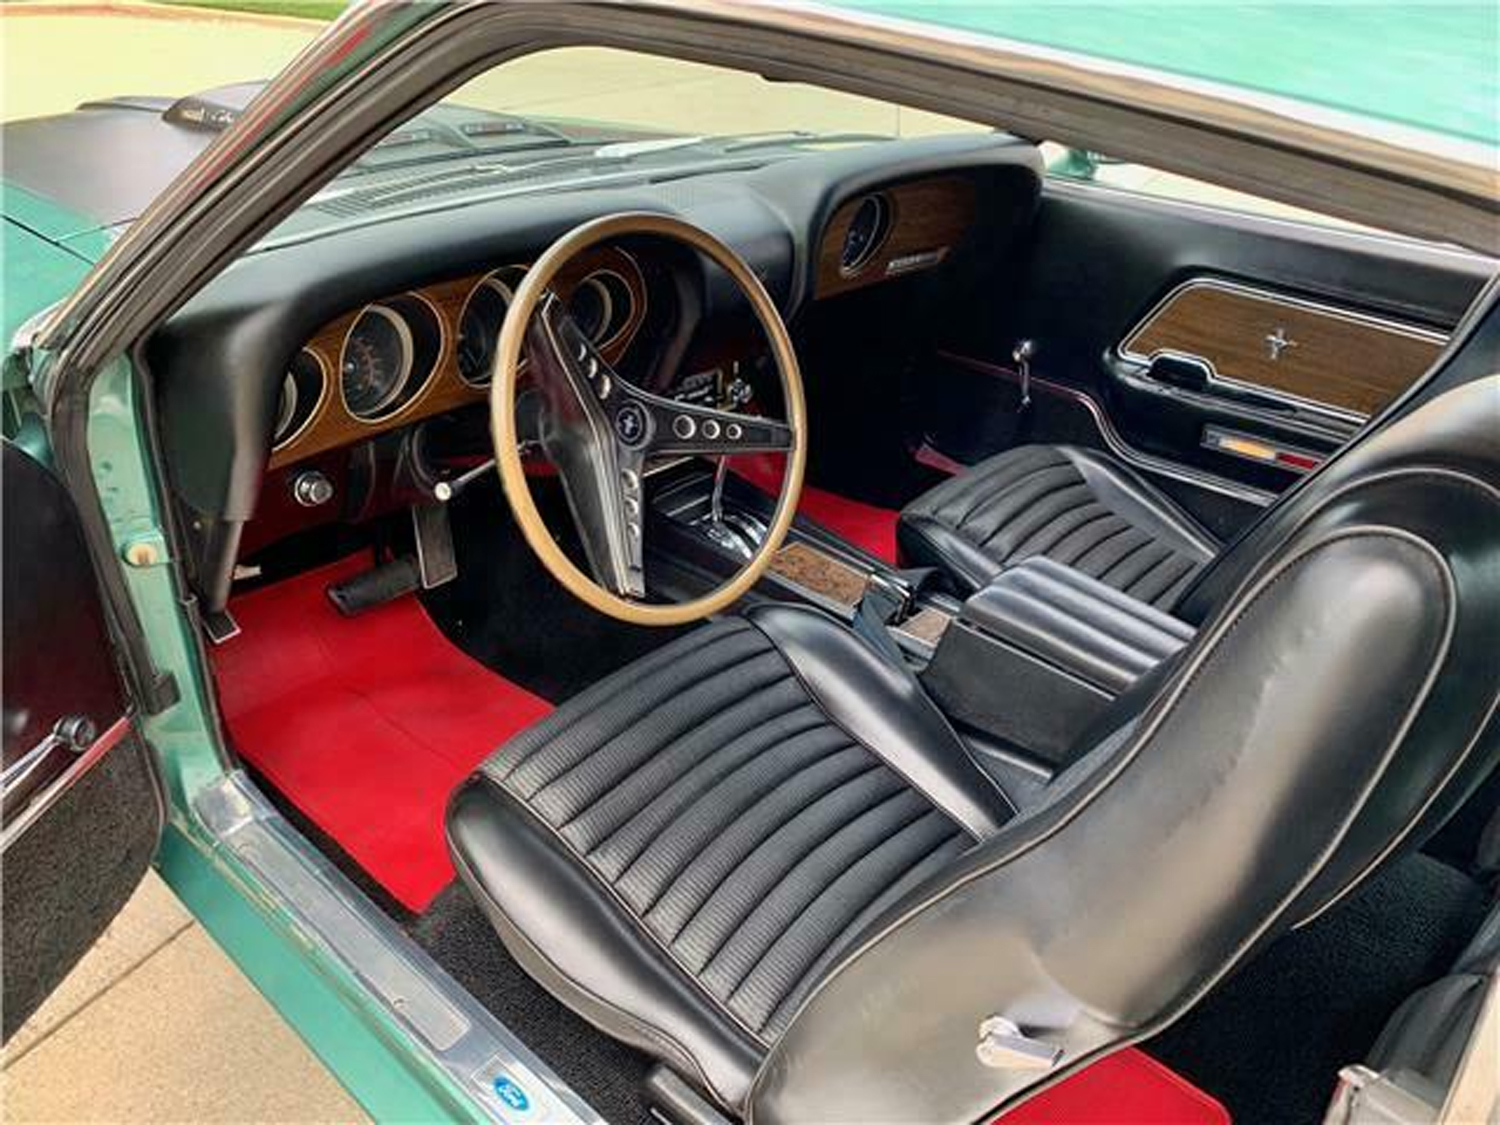 1969 Mustang Coupe Interior